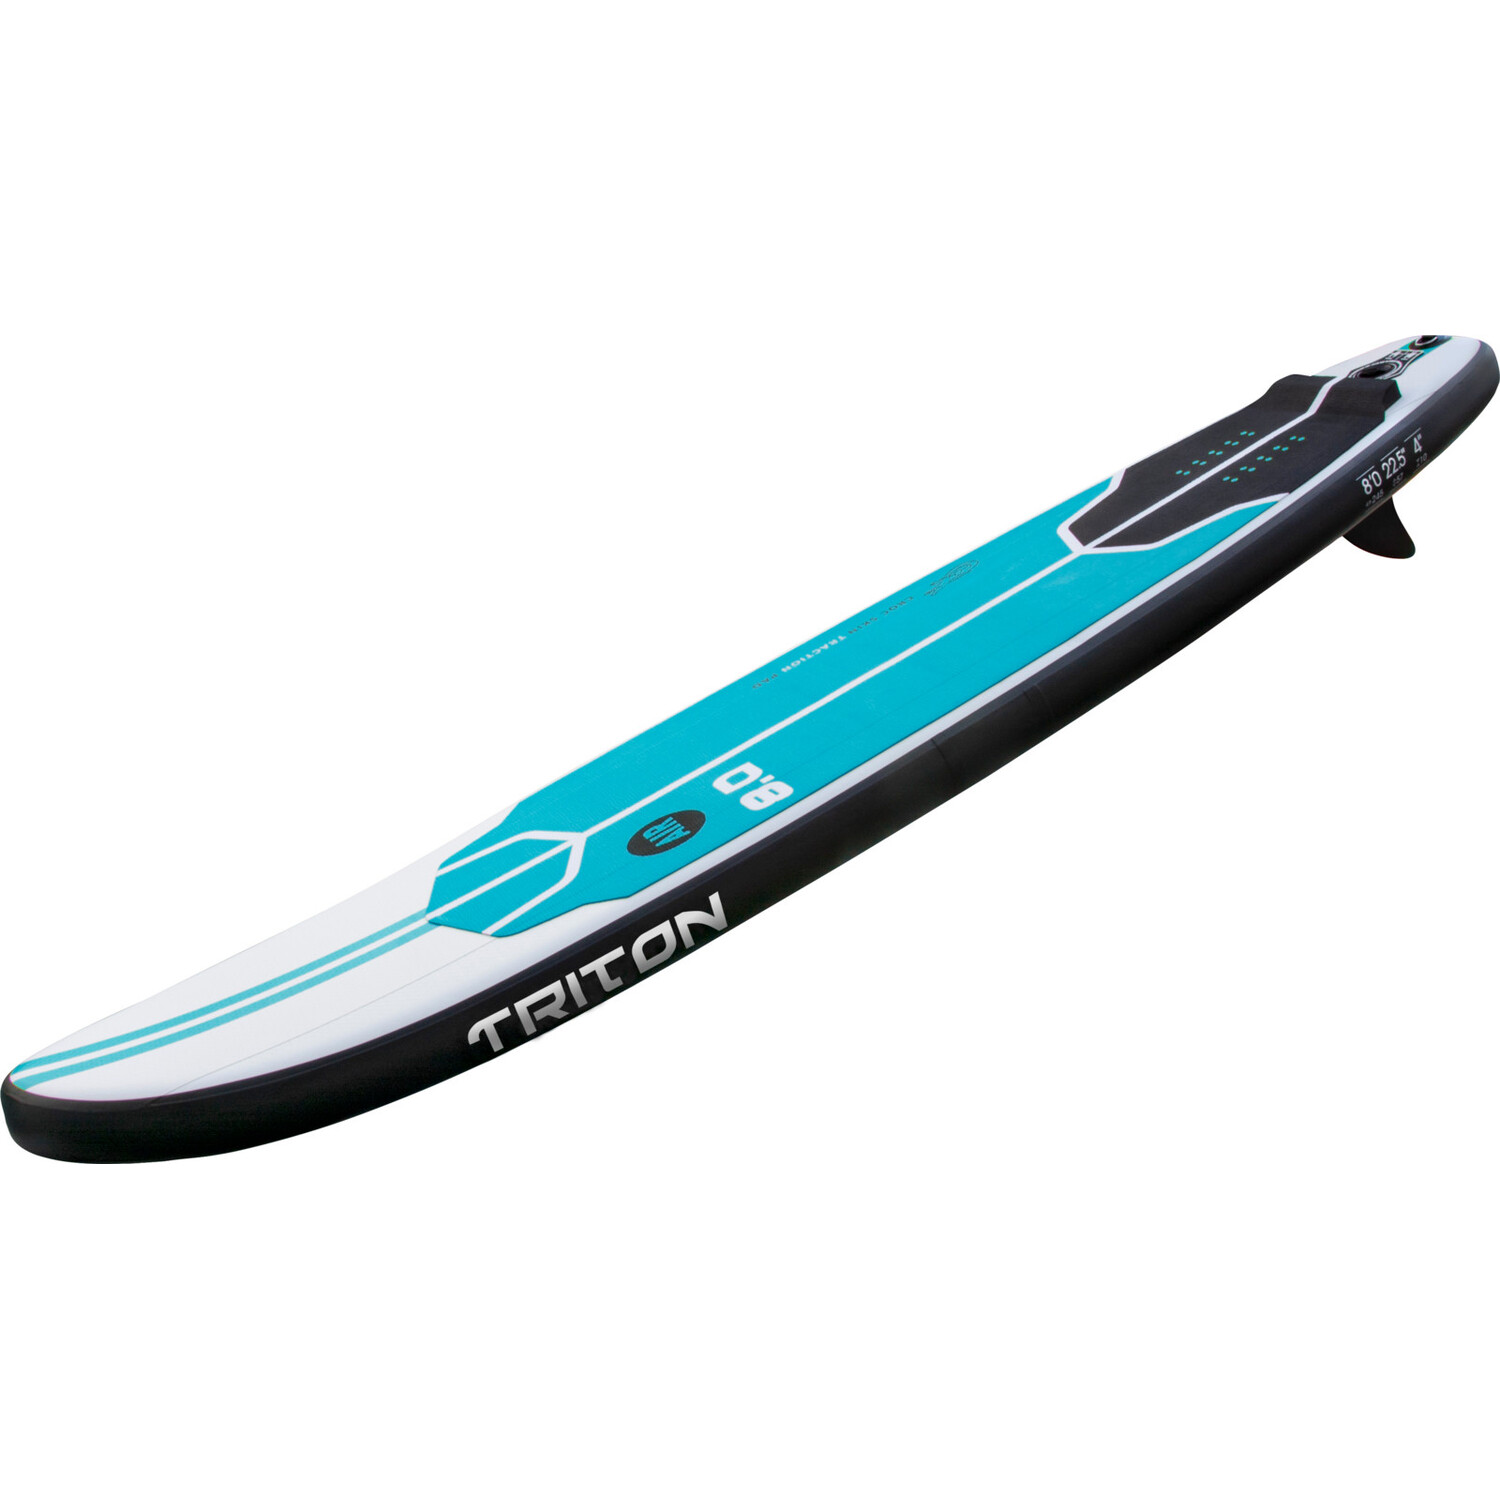 XQMAX 245 Surf Paddle Board - Blue Image 2